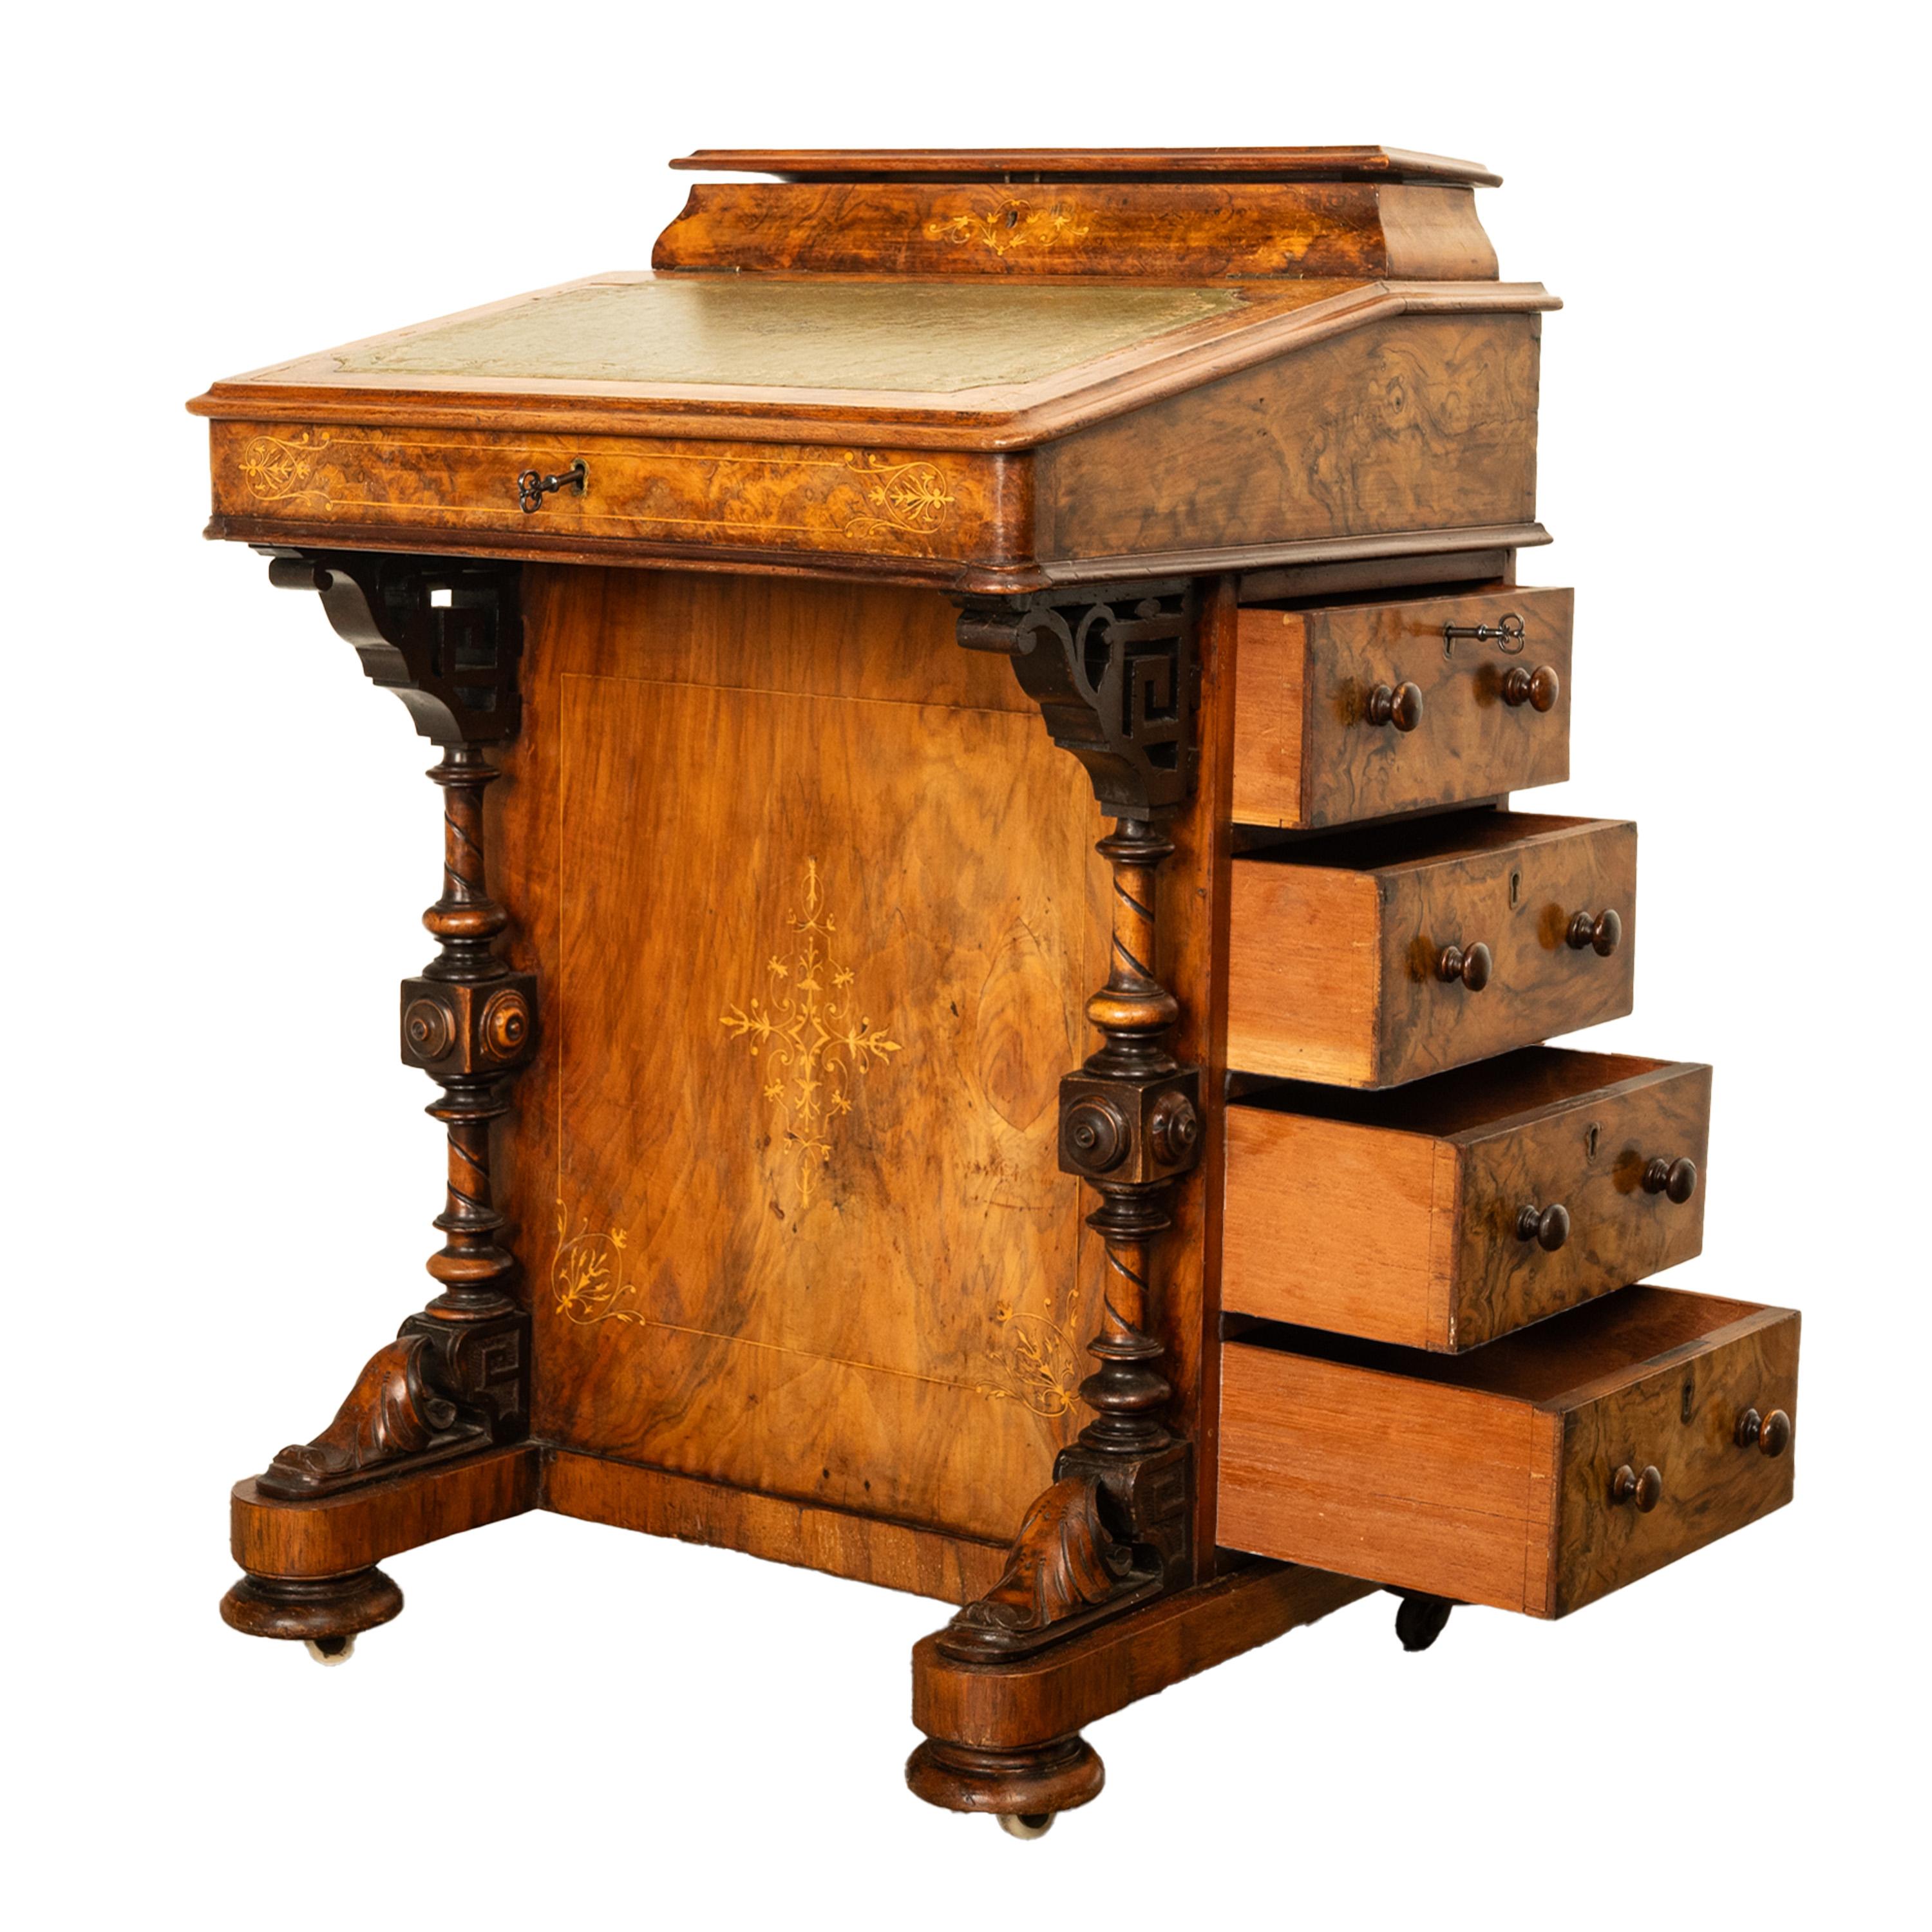 Mid-19th Century Antique Victorian Burl Walnut Inlaid Marquetry Carved Davenport Desk 1860 For Sale